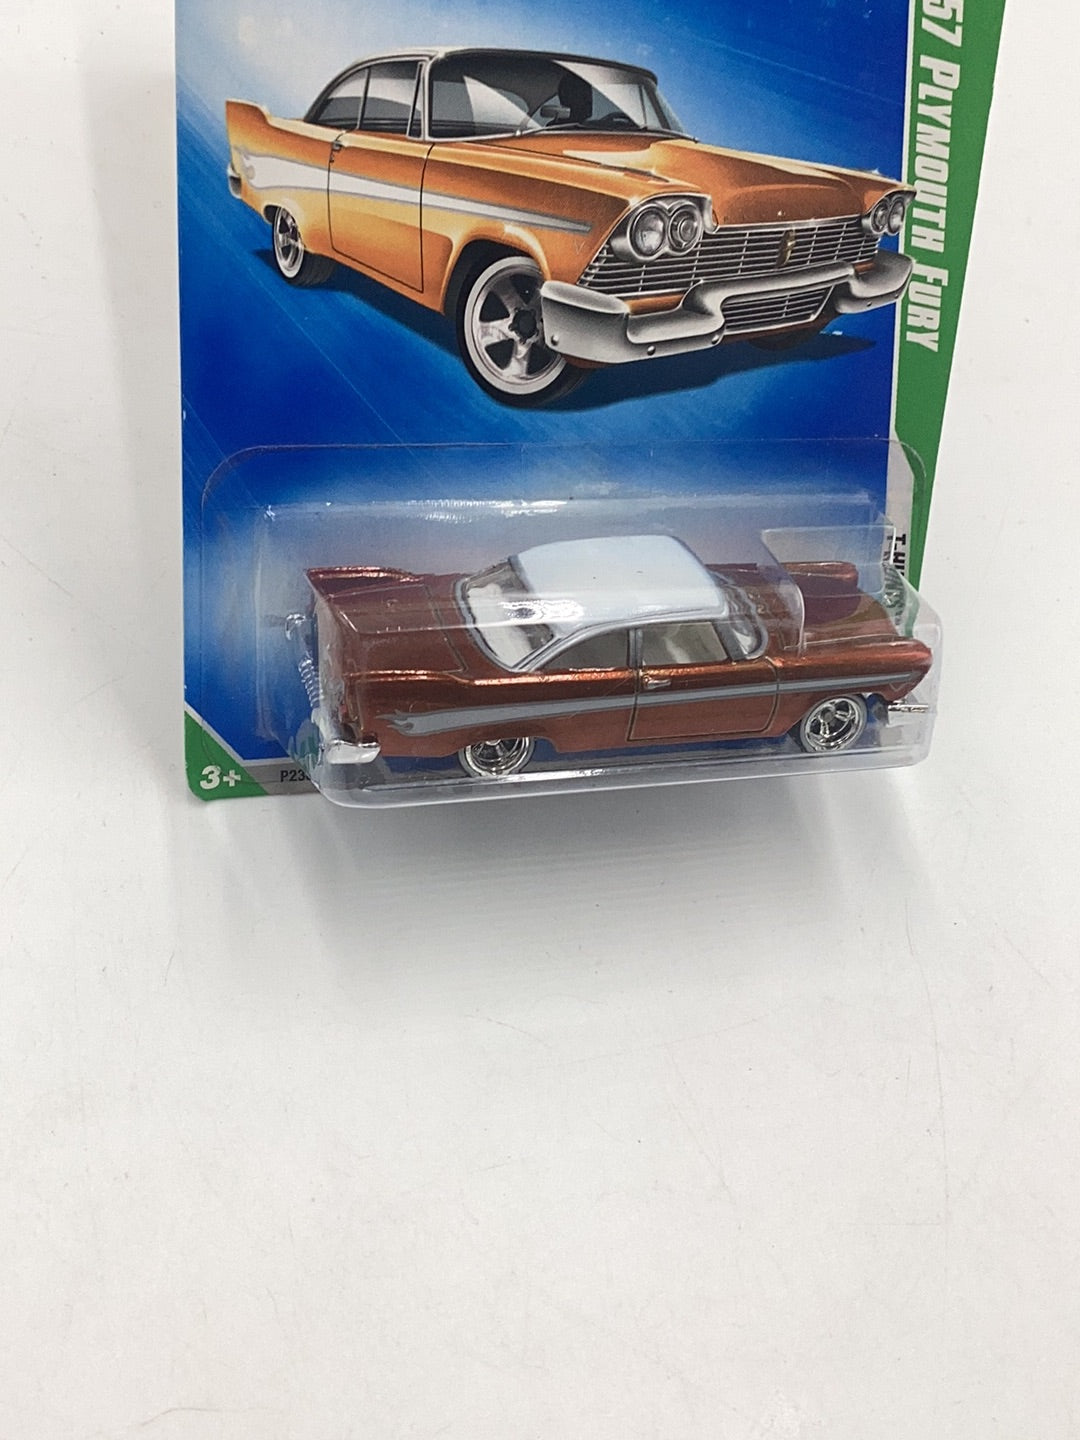 2009 hot wheels treasure hunt #44 57 Plymouth Fury with protector